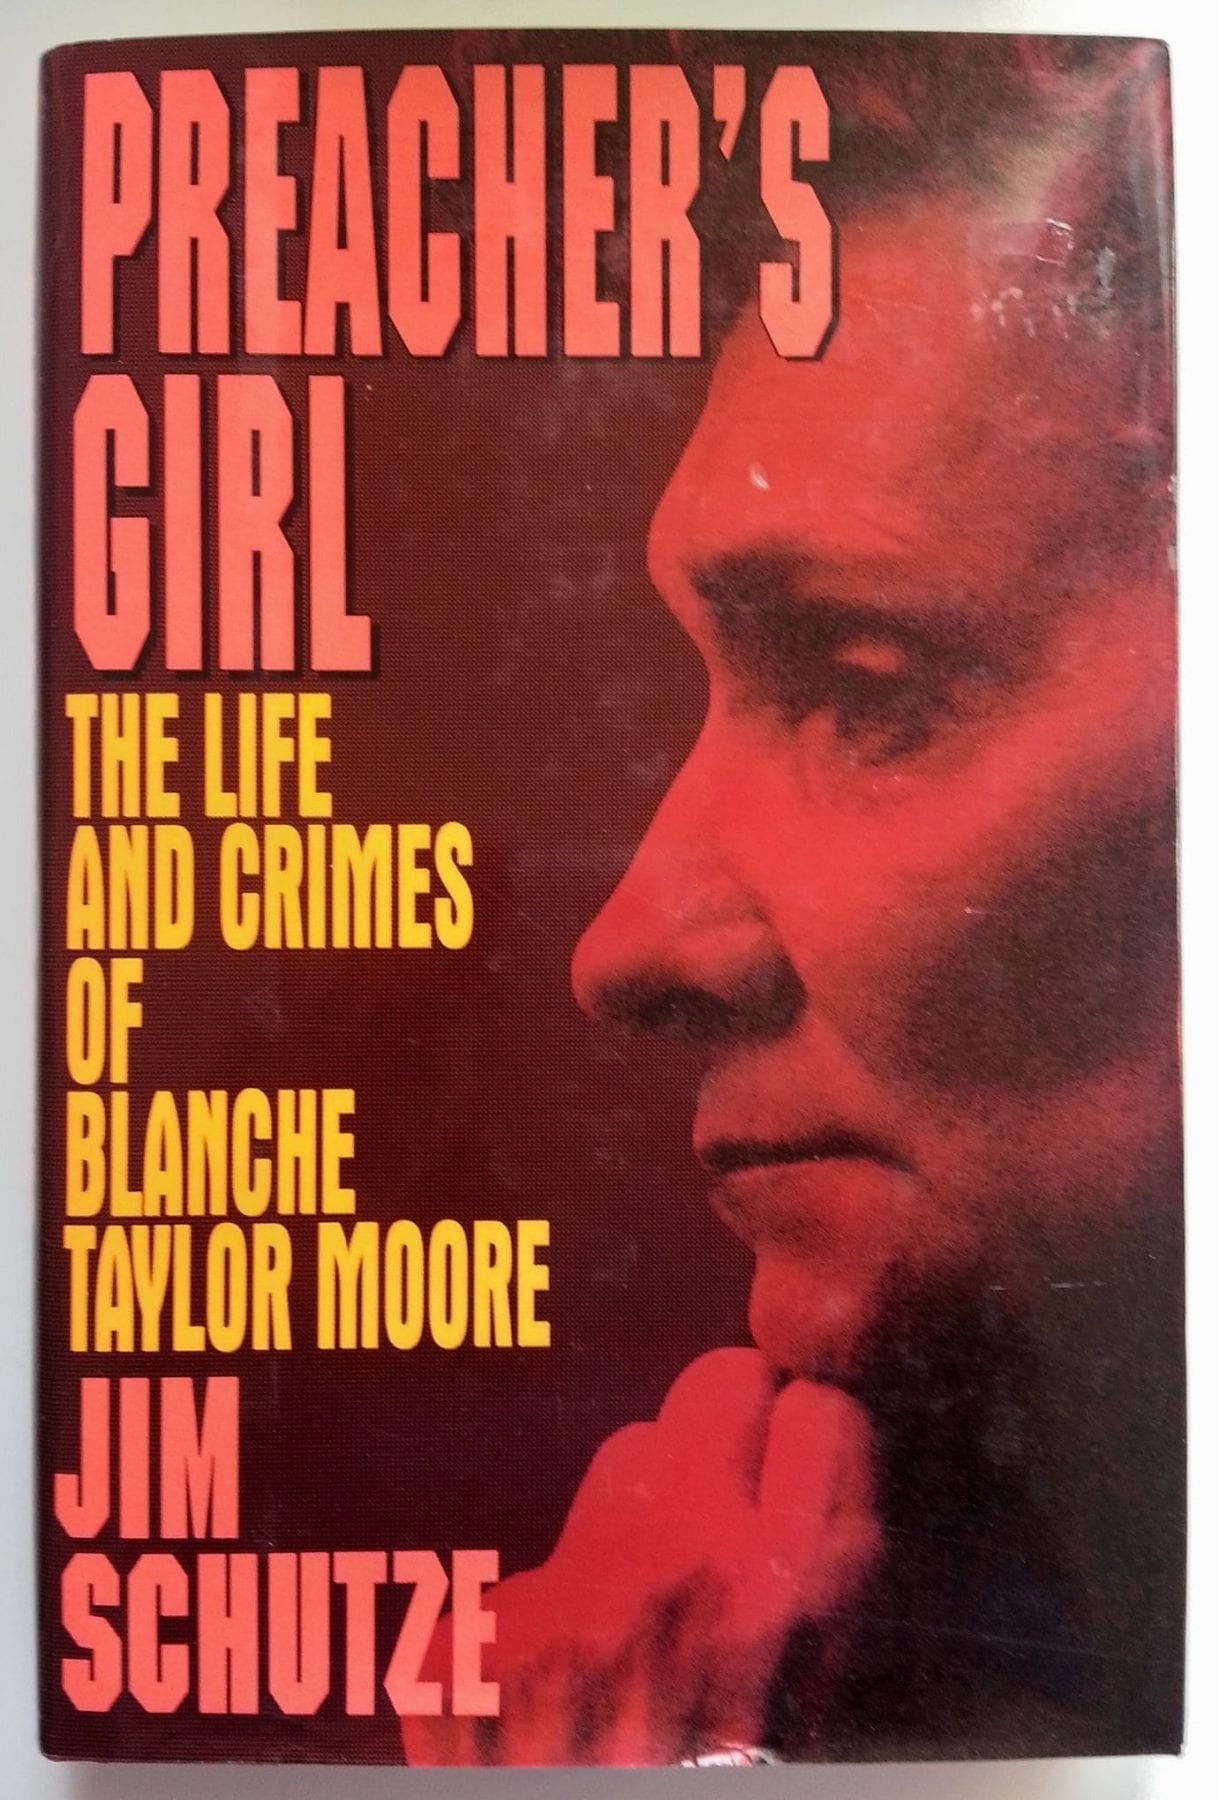 Preacher’s Girl- The Life and Crimes of Blanche Taylor Moore by Jim Schutze